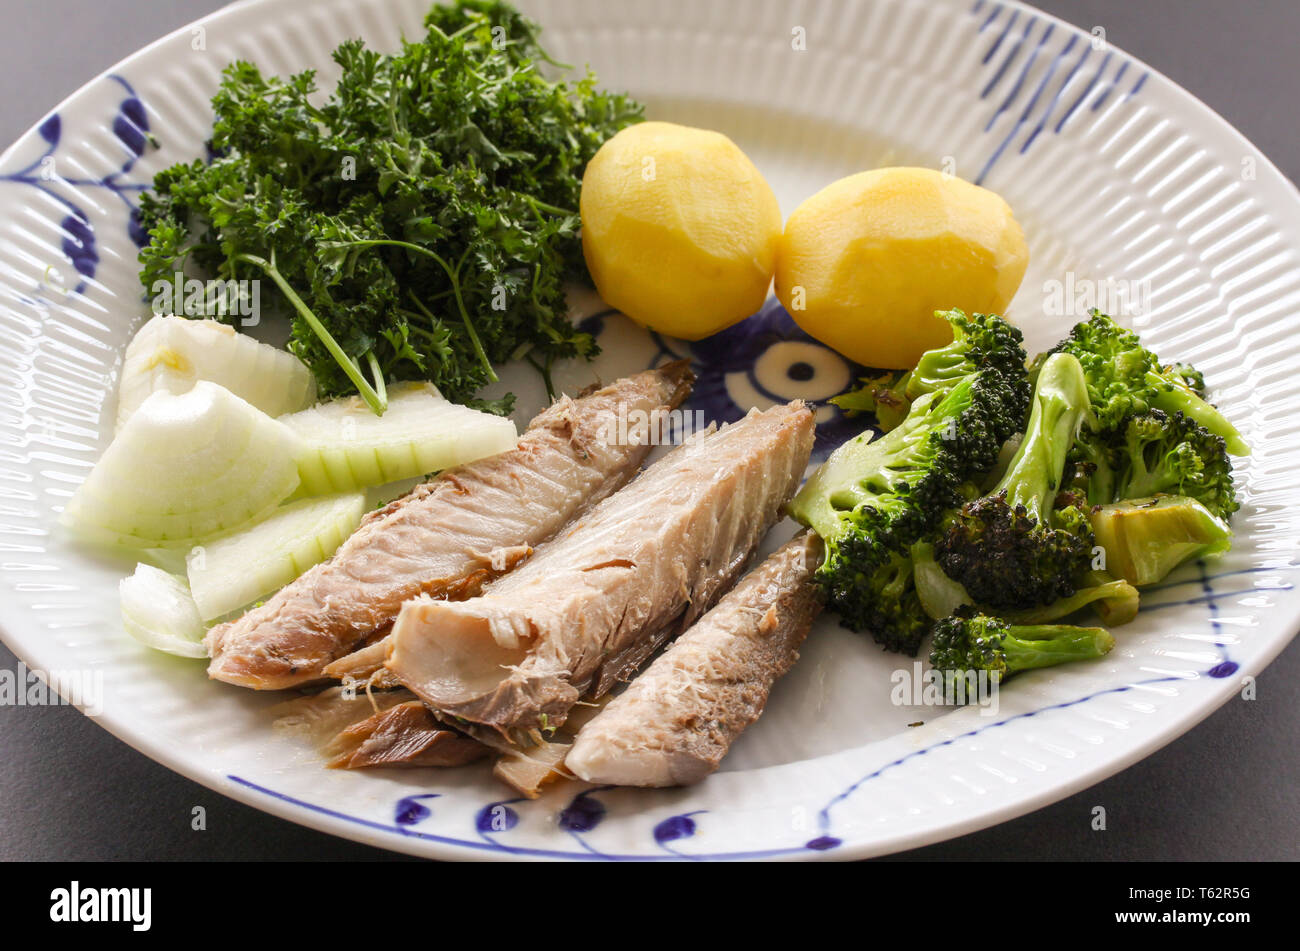 Mackerel fish dish with potatoes, broccoli, onions and parley. Fatty, oily fish is an excellent and healthy source of DHA and EPA, which are two key t Stock Photo